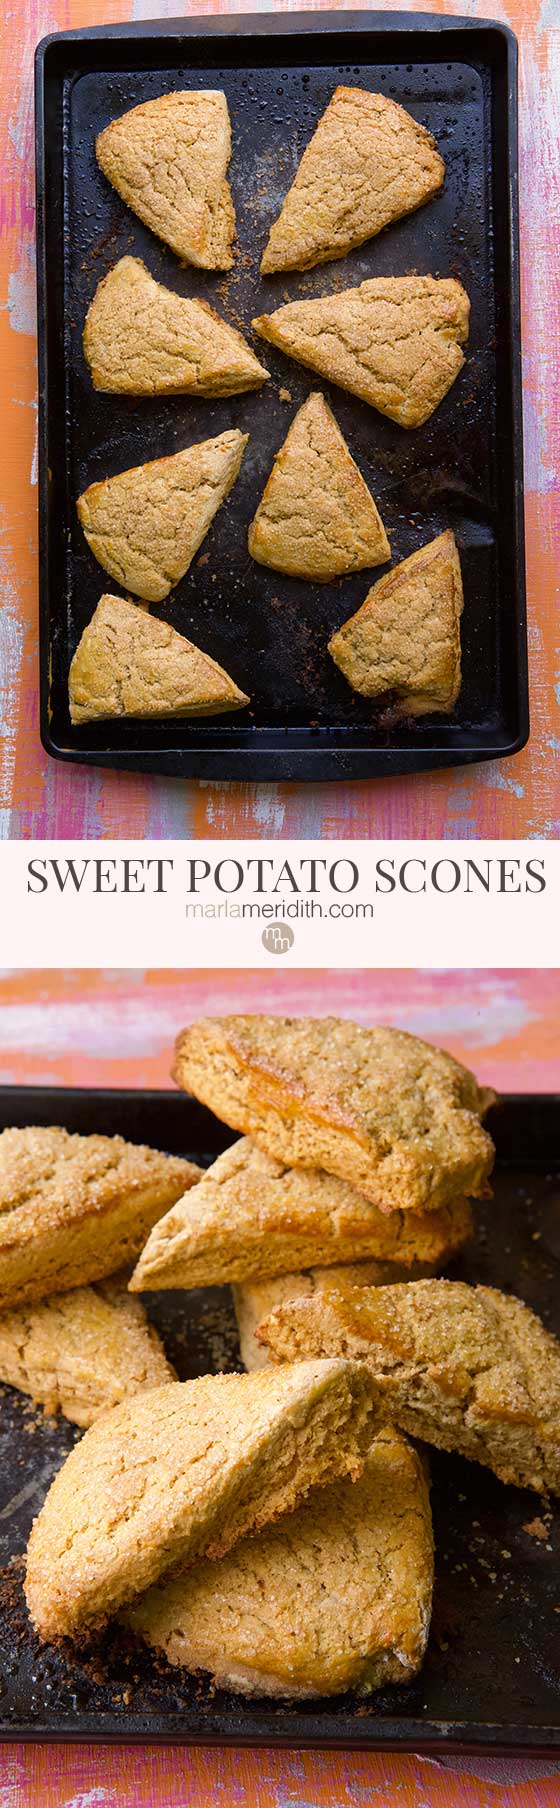 These Sweet Potato Scones come together quickly and easily. A delicious recipe for breakfast, brunch and snacks. Great for holiday entertaining! MarlaMeridith.com